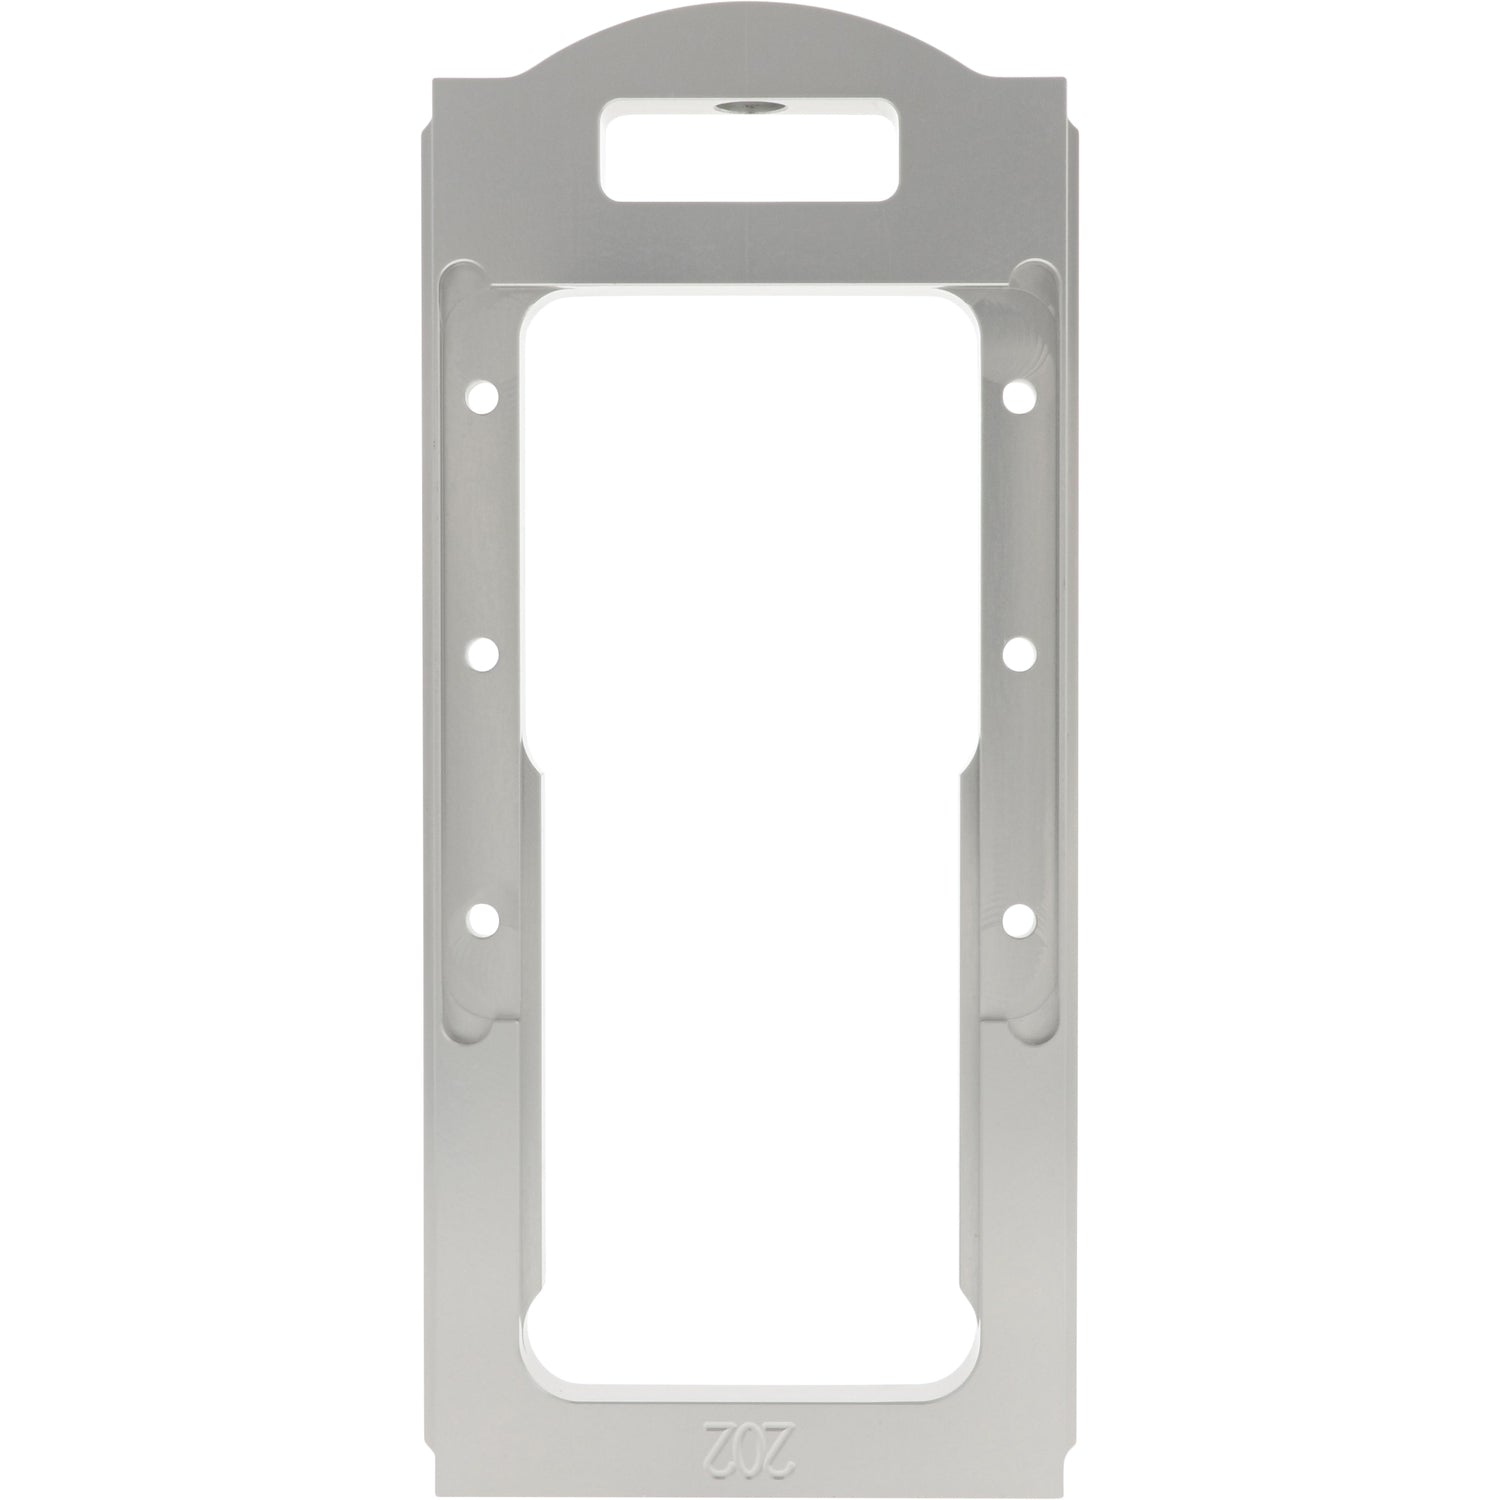 Gray aluminum rectangular part with center cut out and multiple through holes. on a white background.